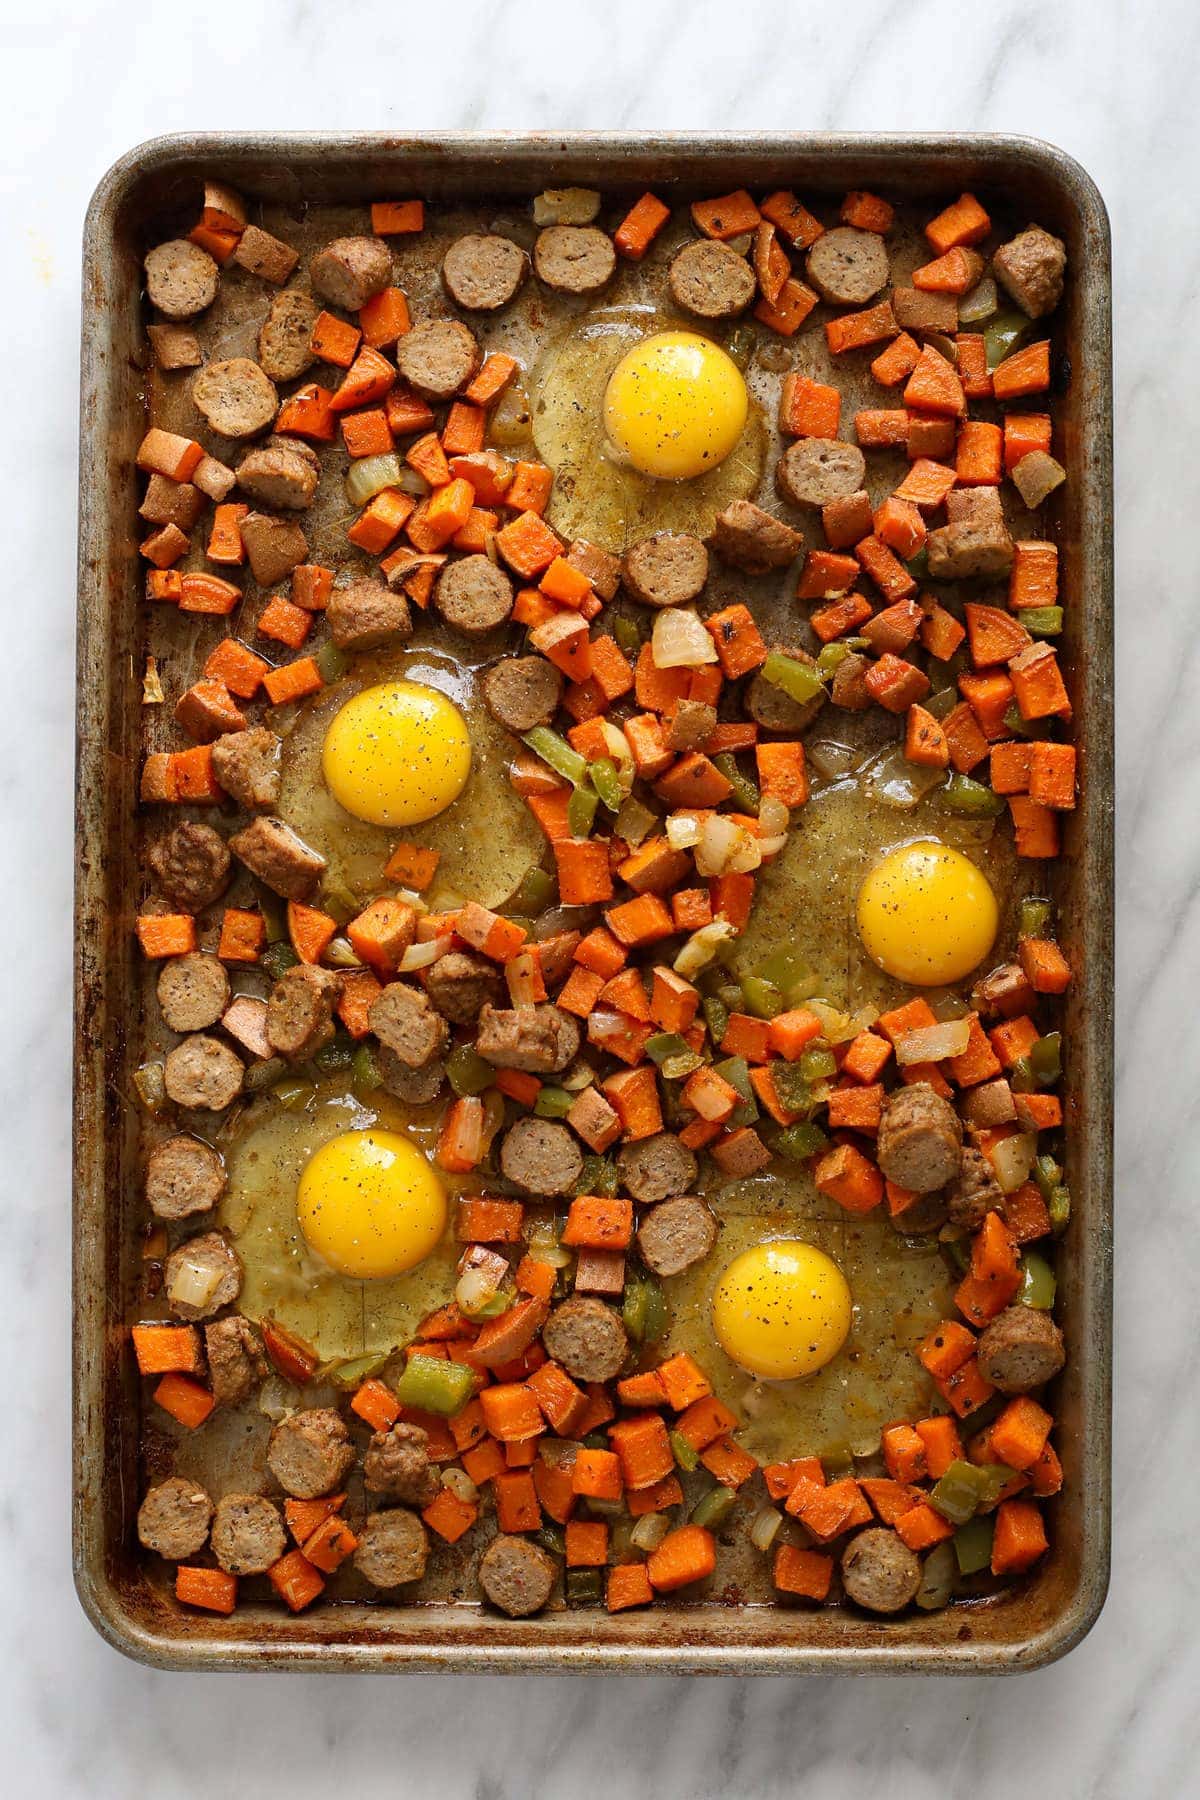 sweet potato nests with raw eggs cracked into them on sheet pan